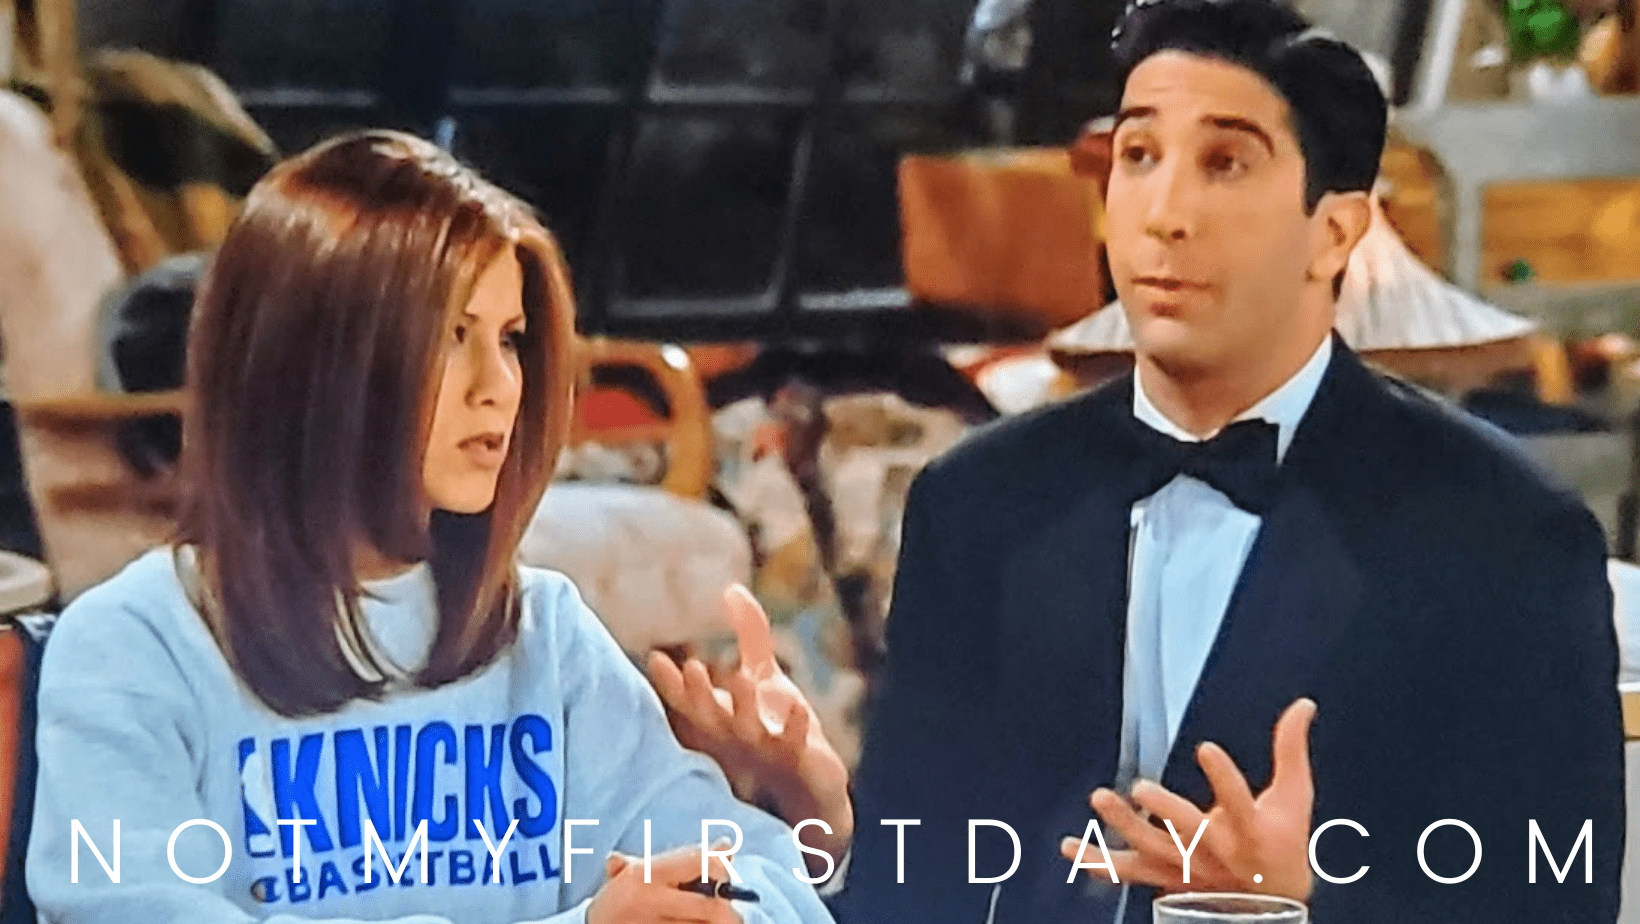 What Made Ross (Almost) Drink the Fat on Friends?